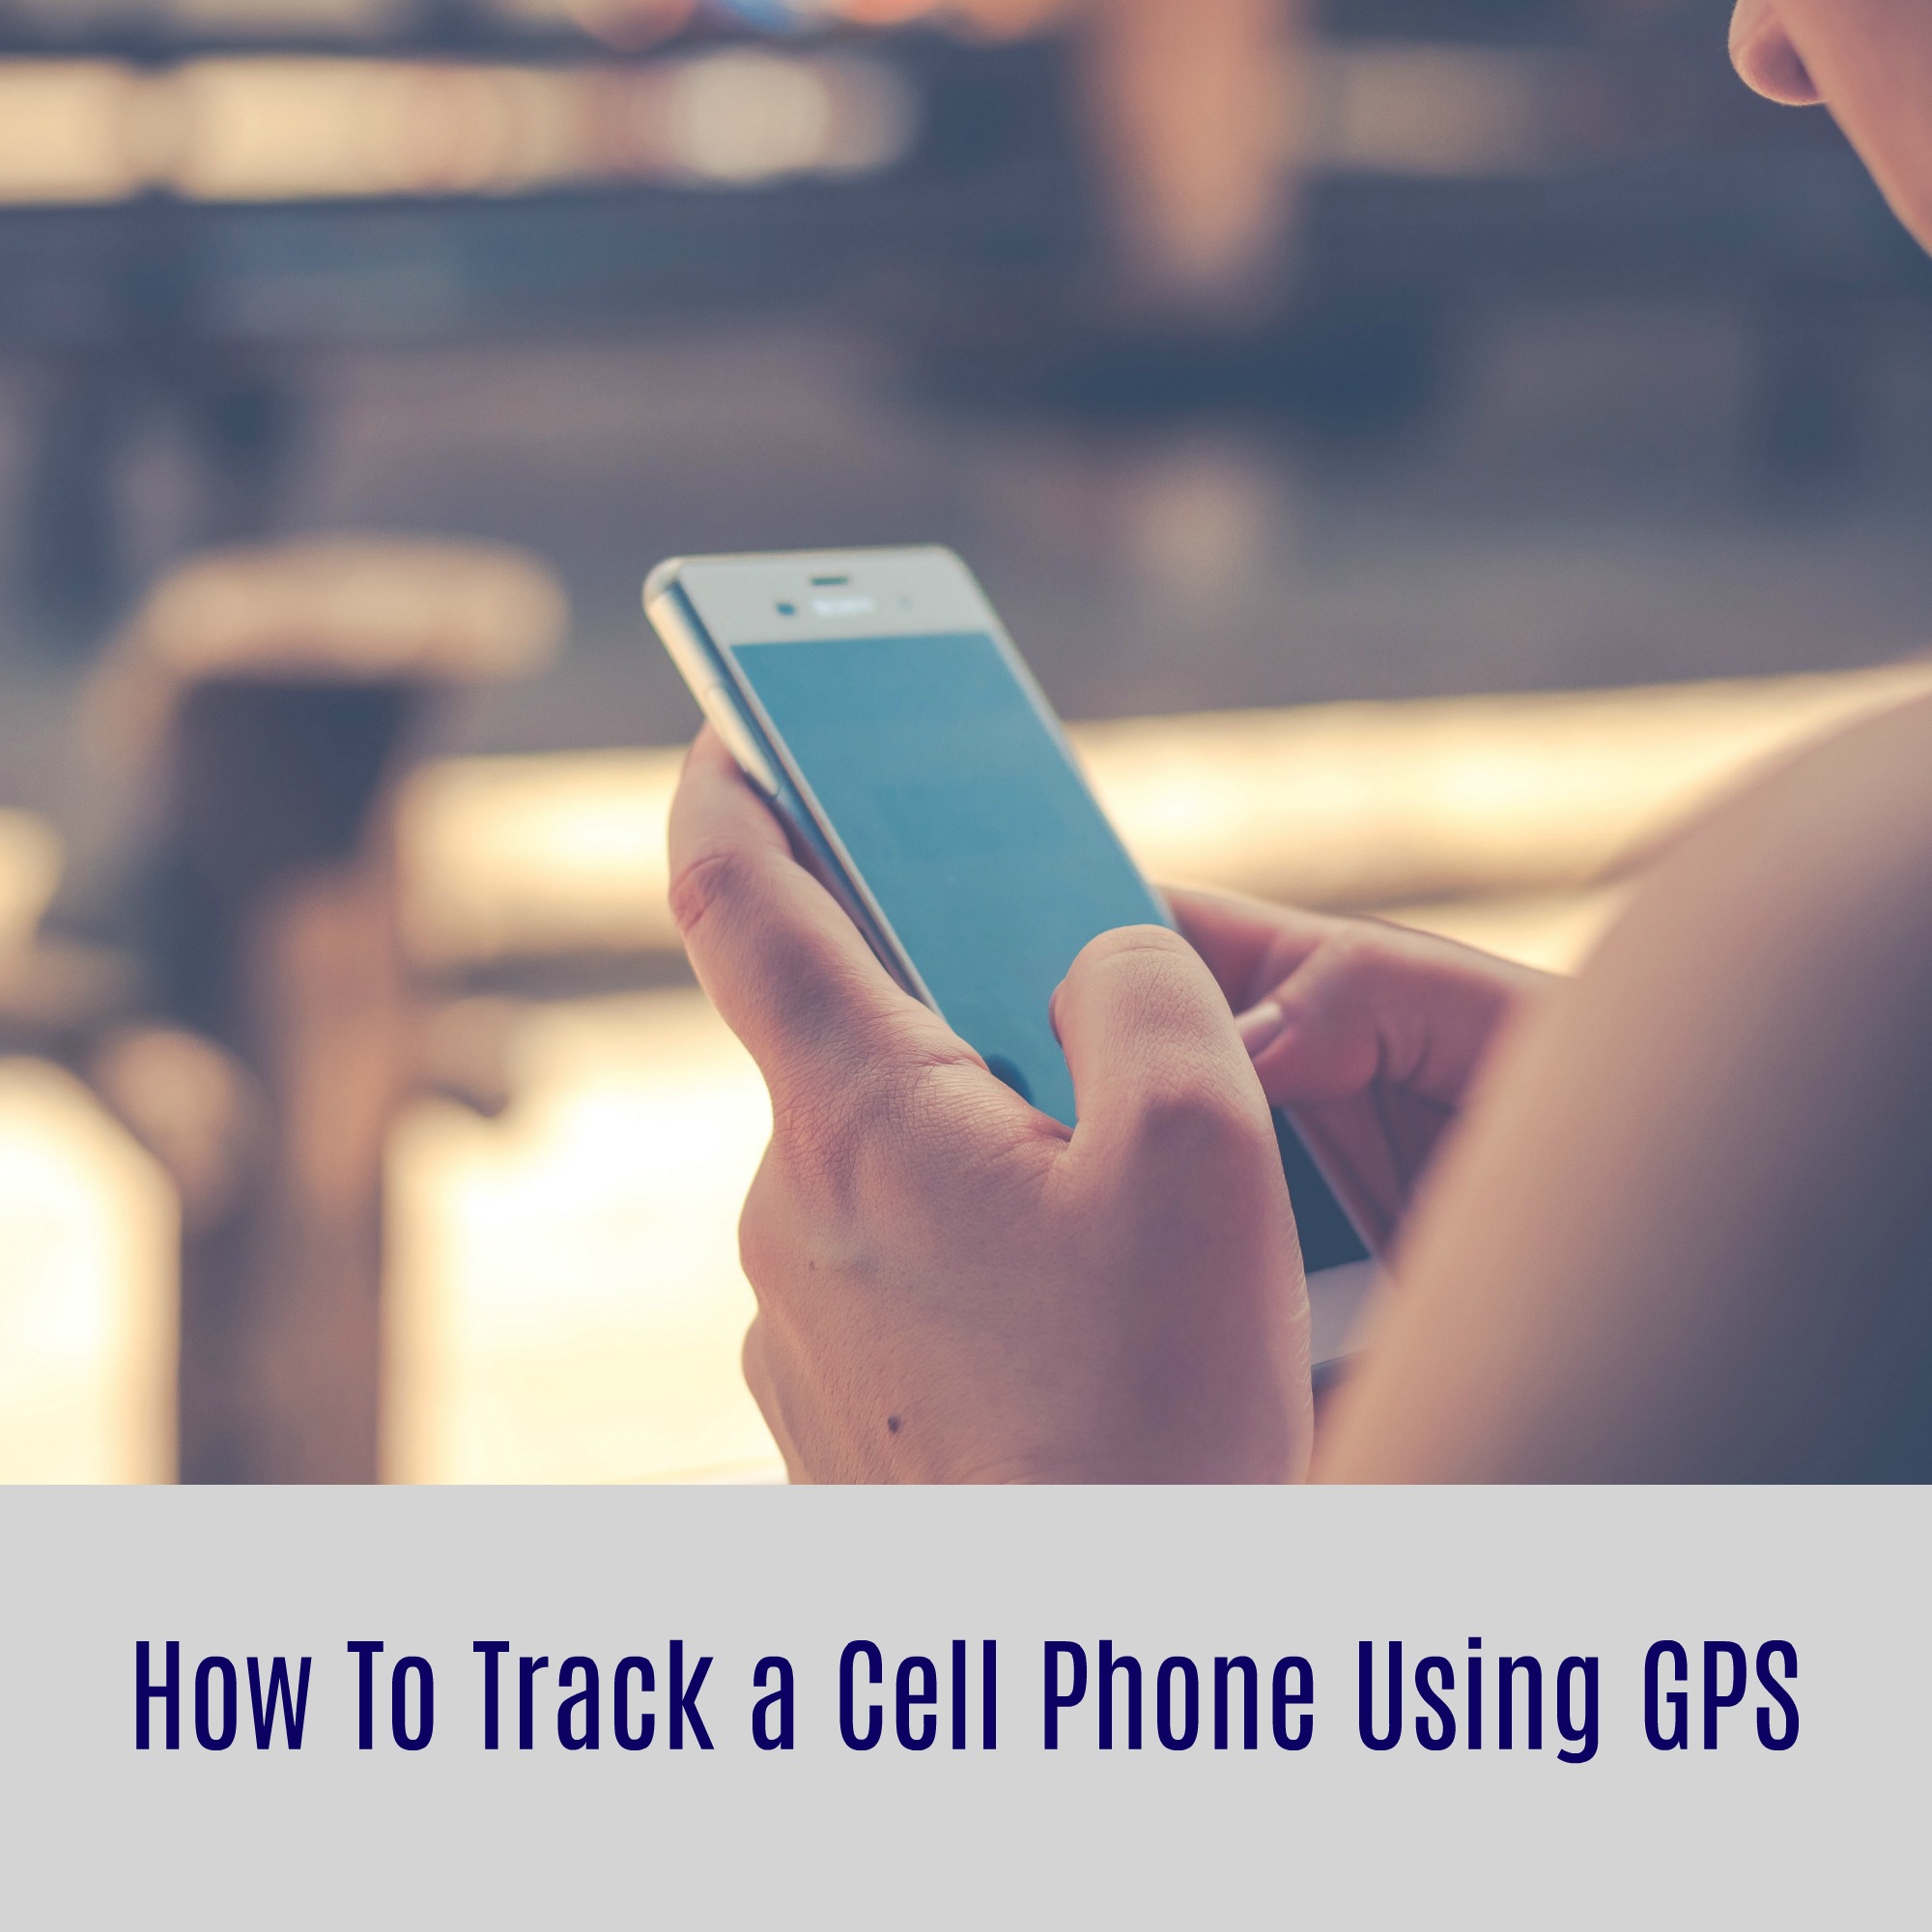 How To Track a Cell Phone Using GPS